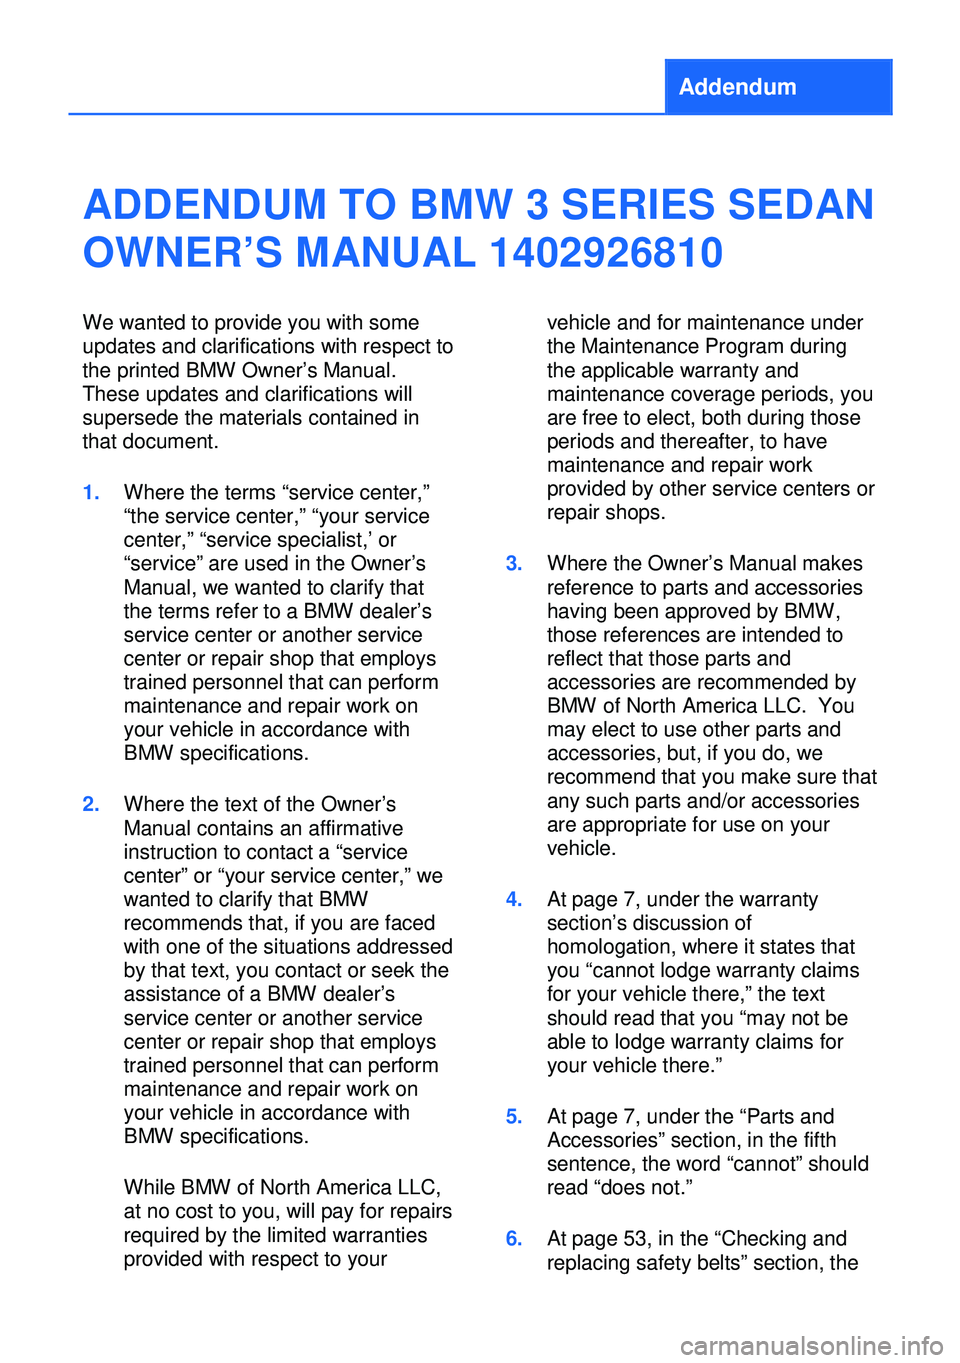 BMW 328I XDRIVE SEDAN 2013  Owners Manual Addendum
ADDENDUM TO BMW 3 SERIES SEDAN
OWNER’S MANUAL 1402926810
We wanted to provide you with some
updates and clarifications with respect to
the printed BMW Owner’s Manual.
These updates and cl